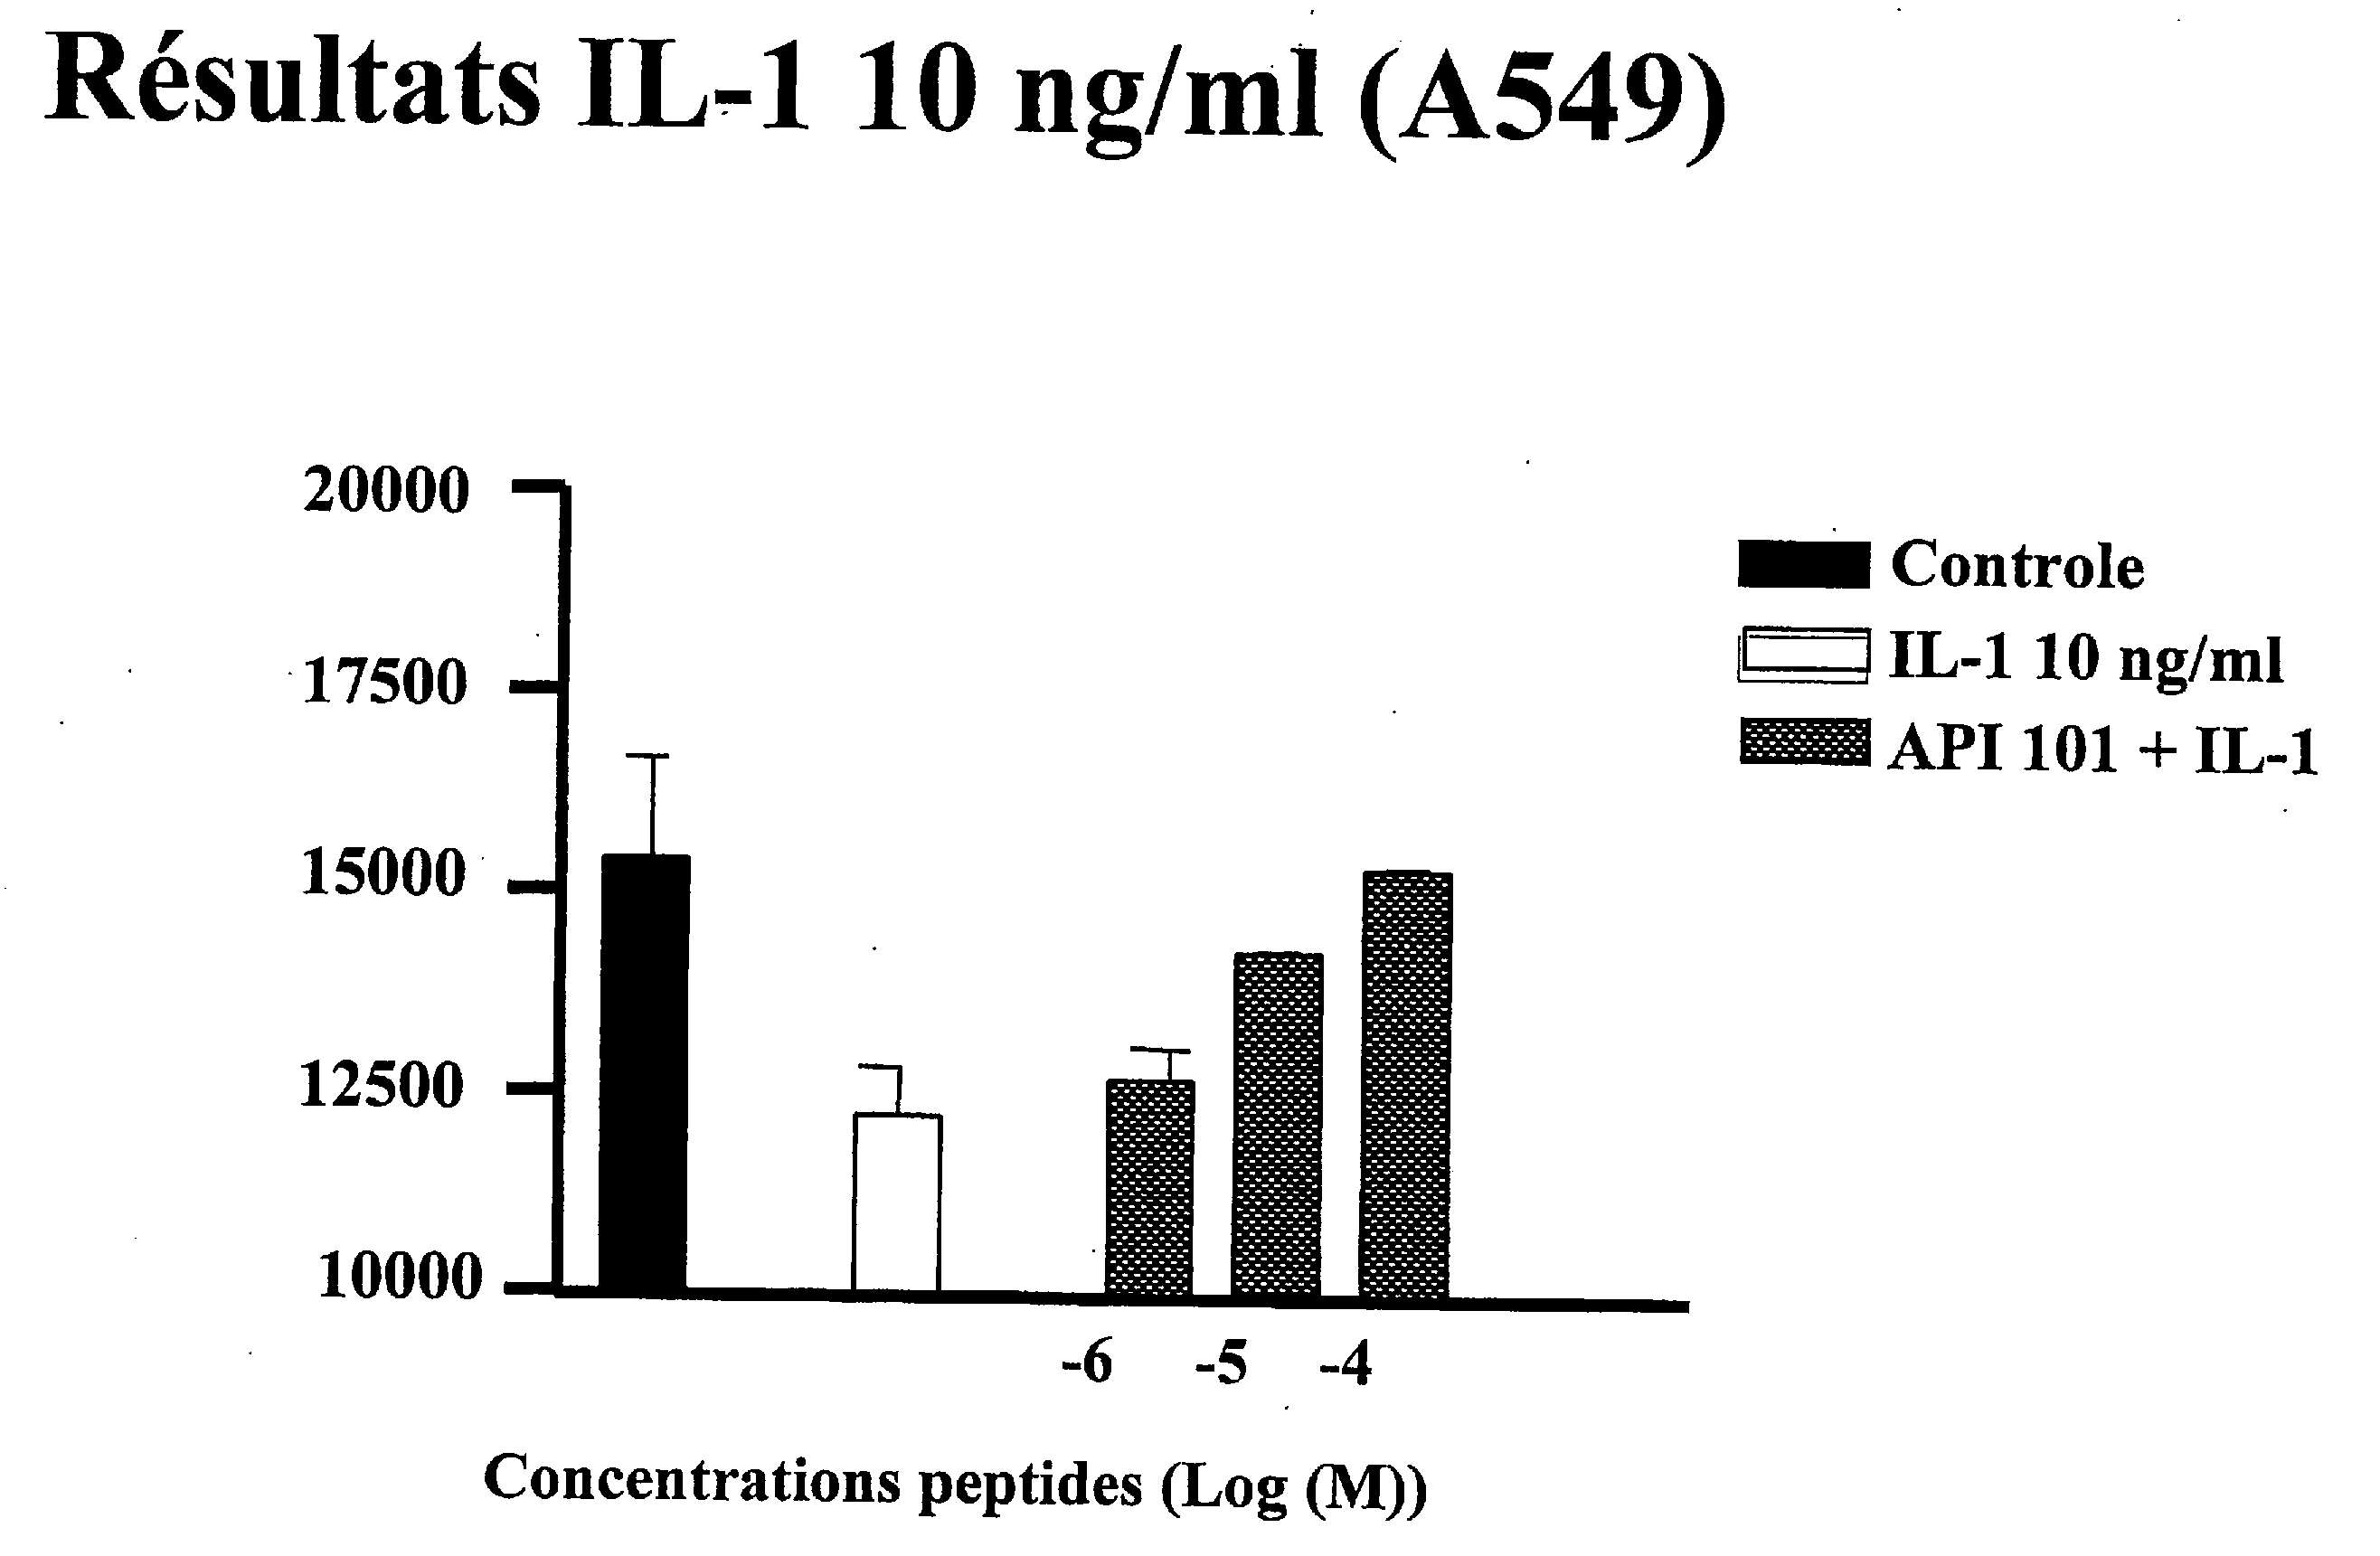 Interleukin-1 receptor antagonists, compositions, and methods of treatment